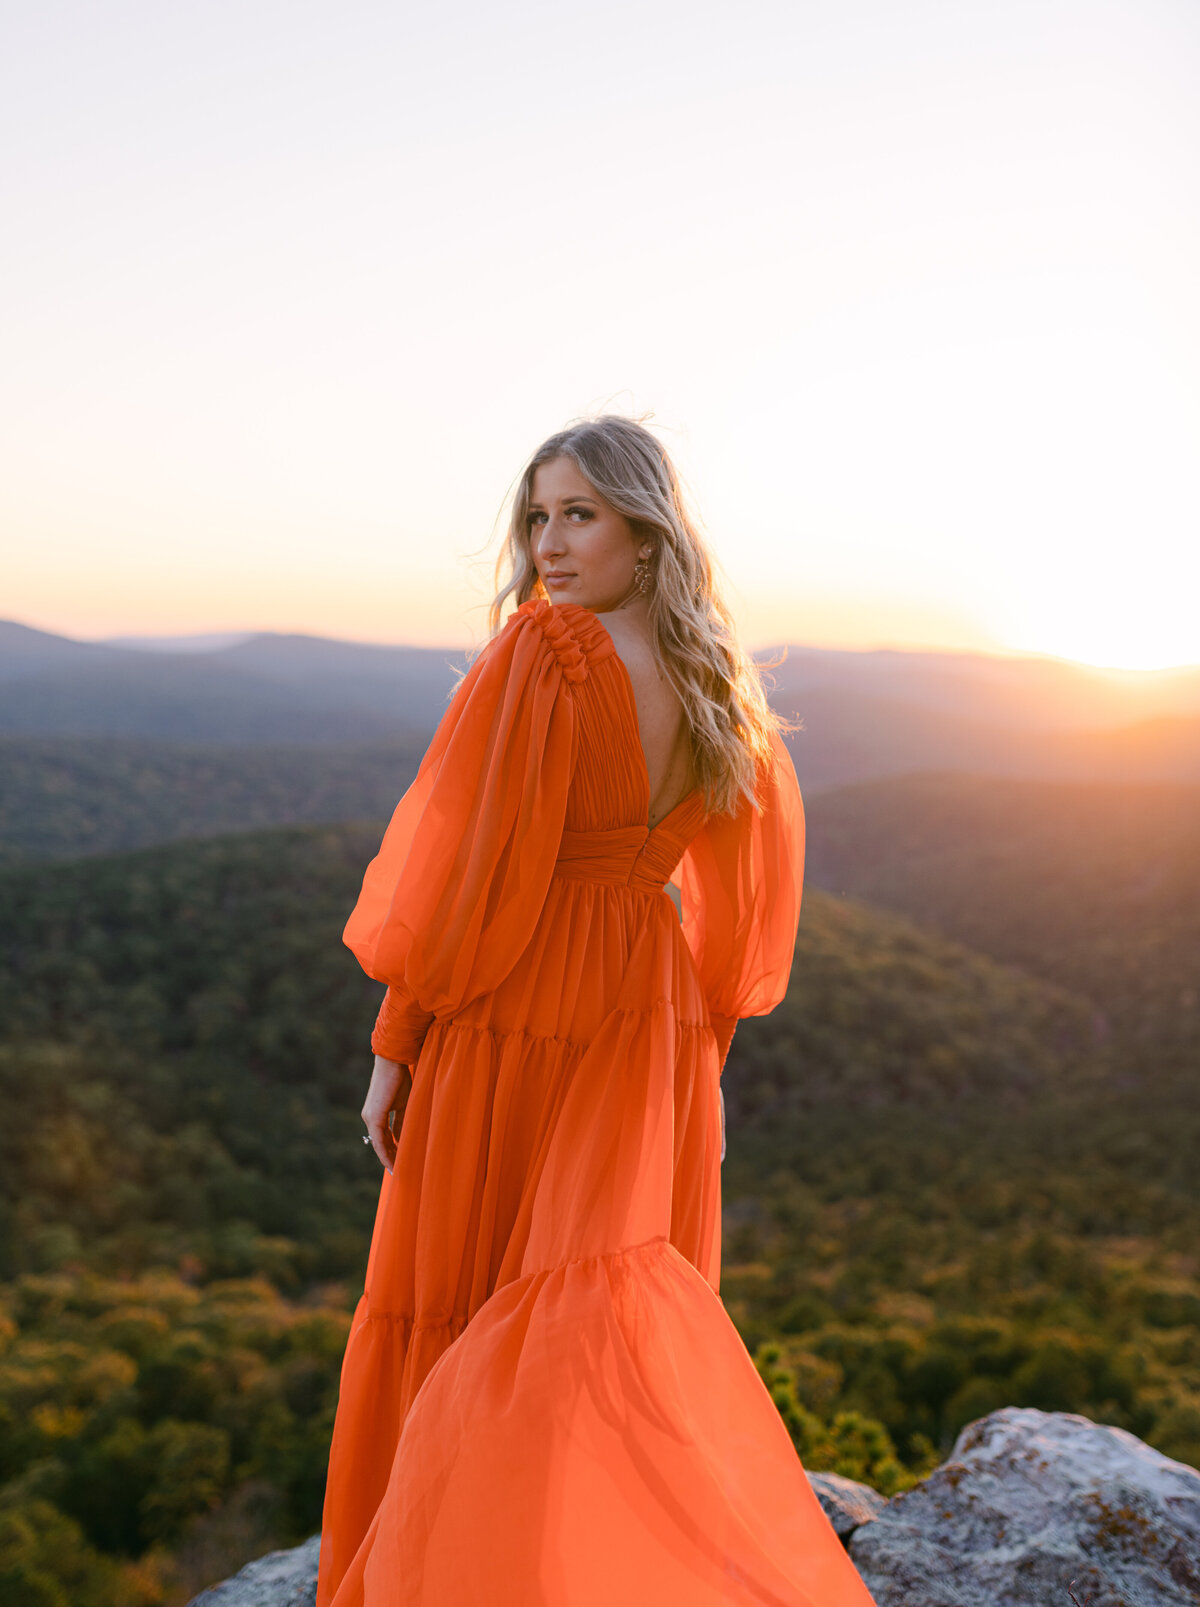 Stunning bride posing for portrait on cliff during sunset